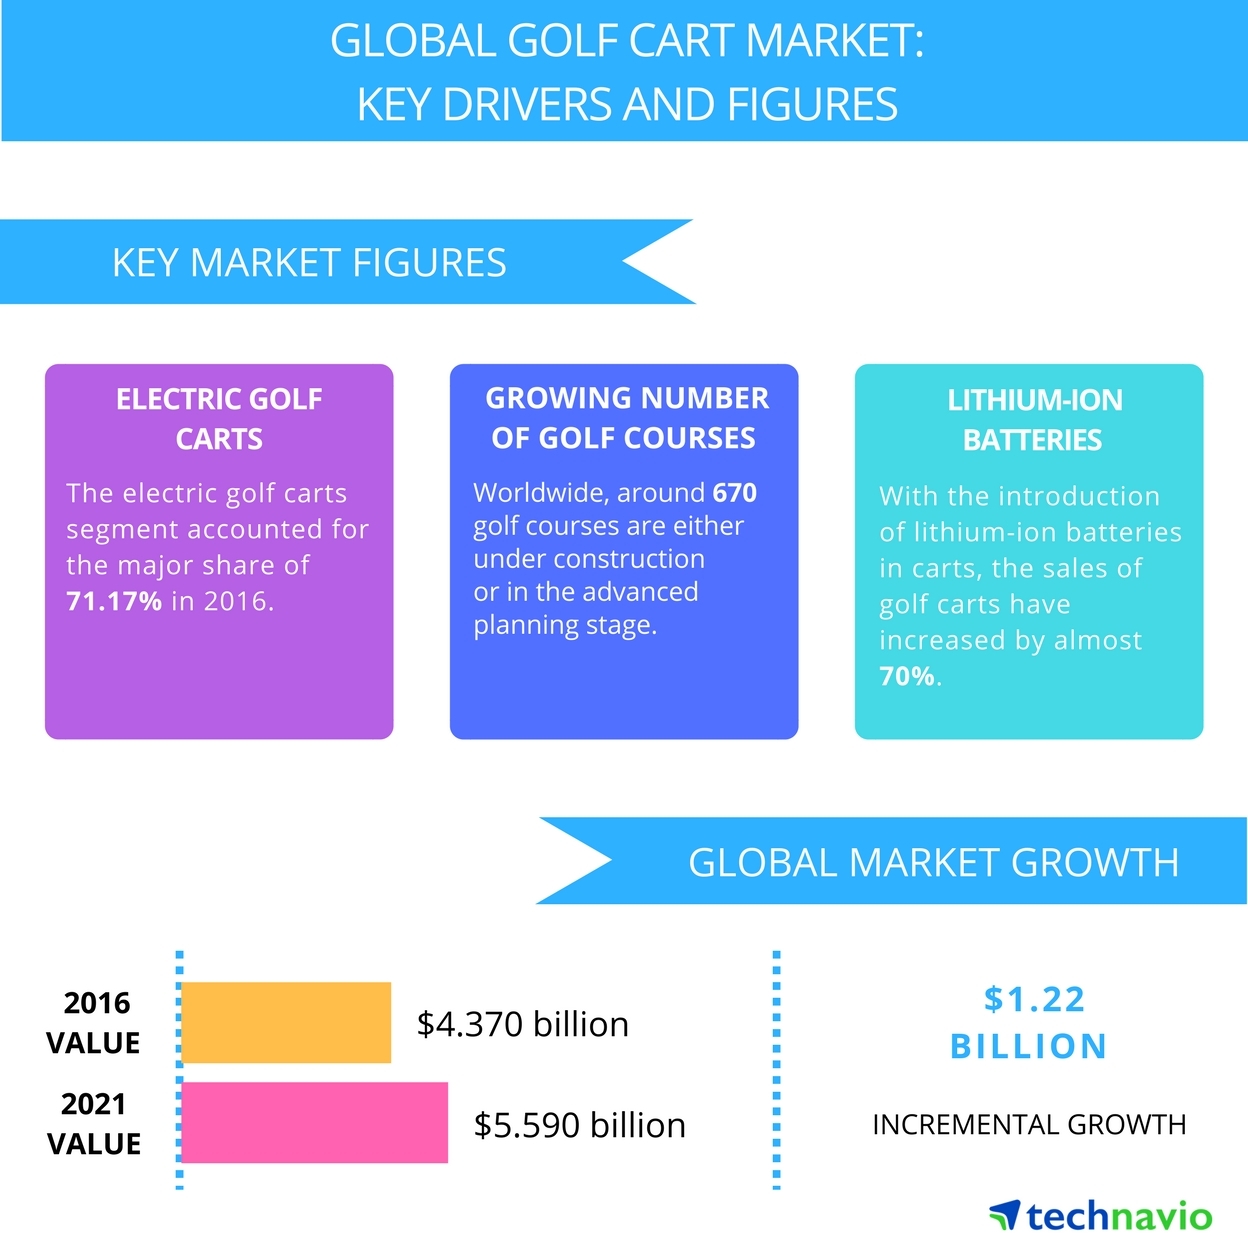 Best Electric Golf Carts 2021 Top 3 Emerging Trends Impacting the Global Golf Cart Market from 